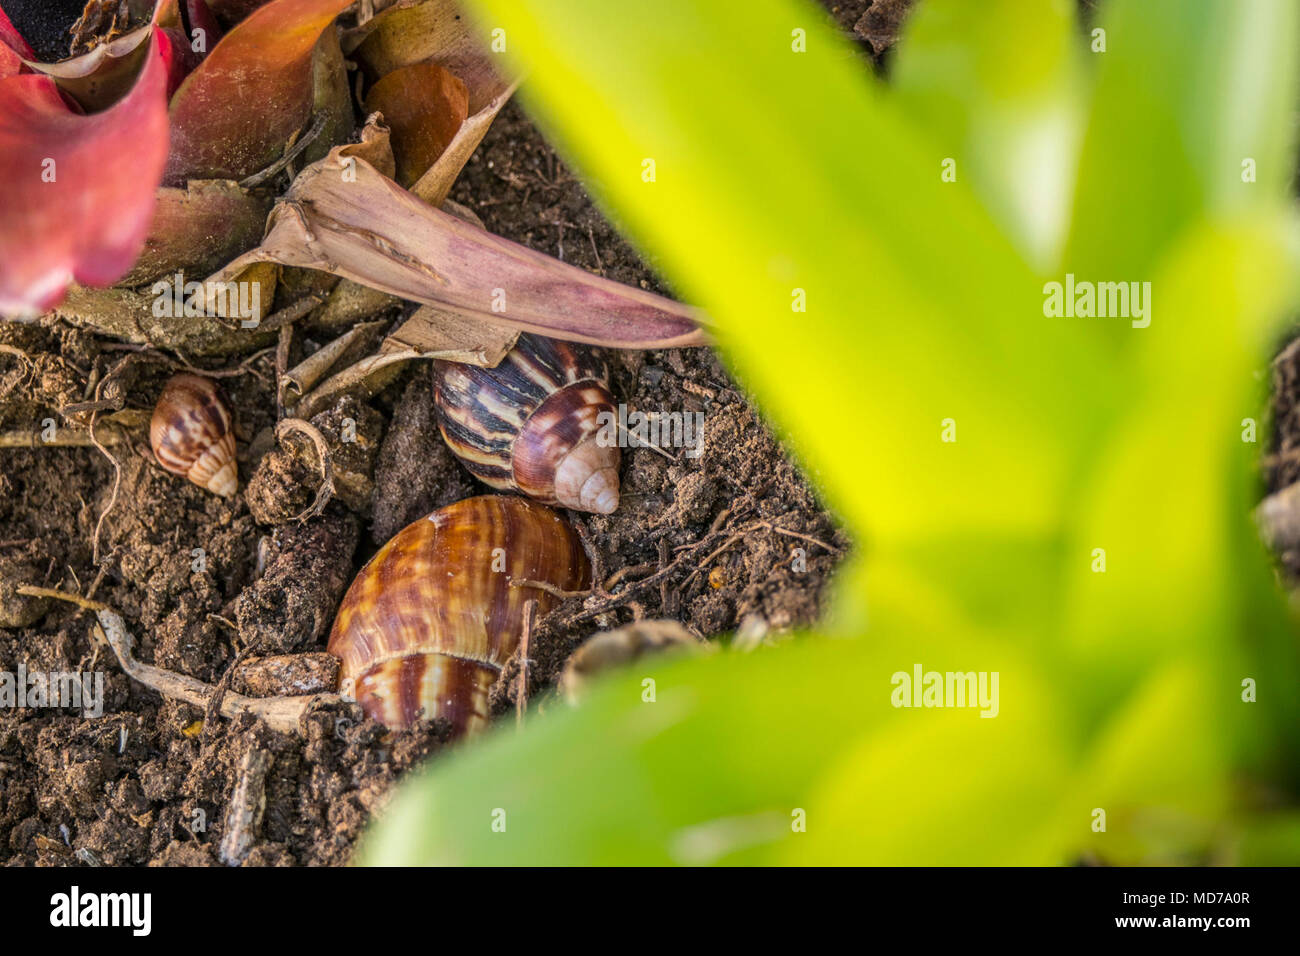 U.S. Department of Agriculture (USDA) Animal and Plant Health Inspection Service (APHIS) Plant Protection and Quarantine (PPQ) program conducts a Giant African Snail (GAS) survey in the Old San Juan, Puerto Rico. Stock Photo